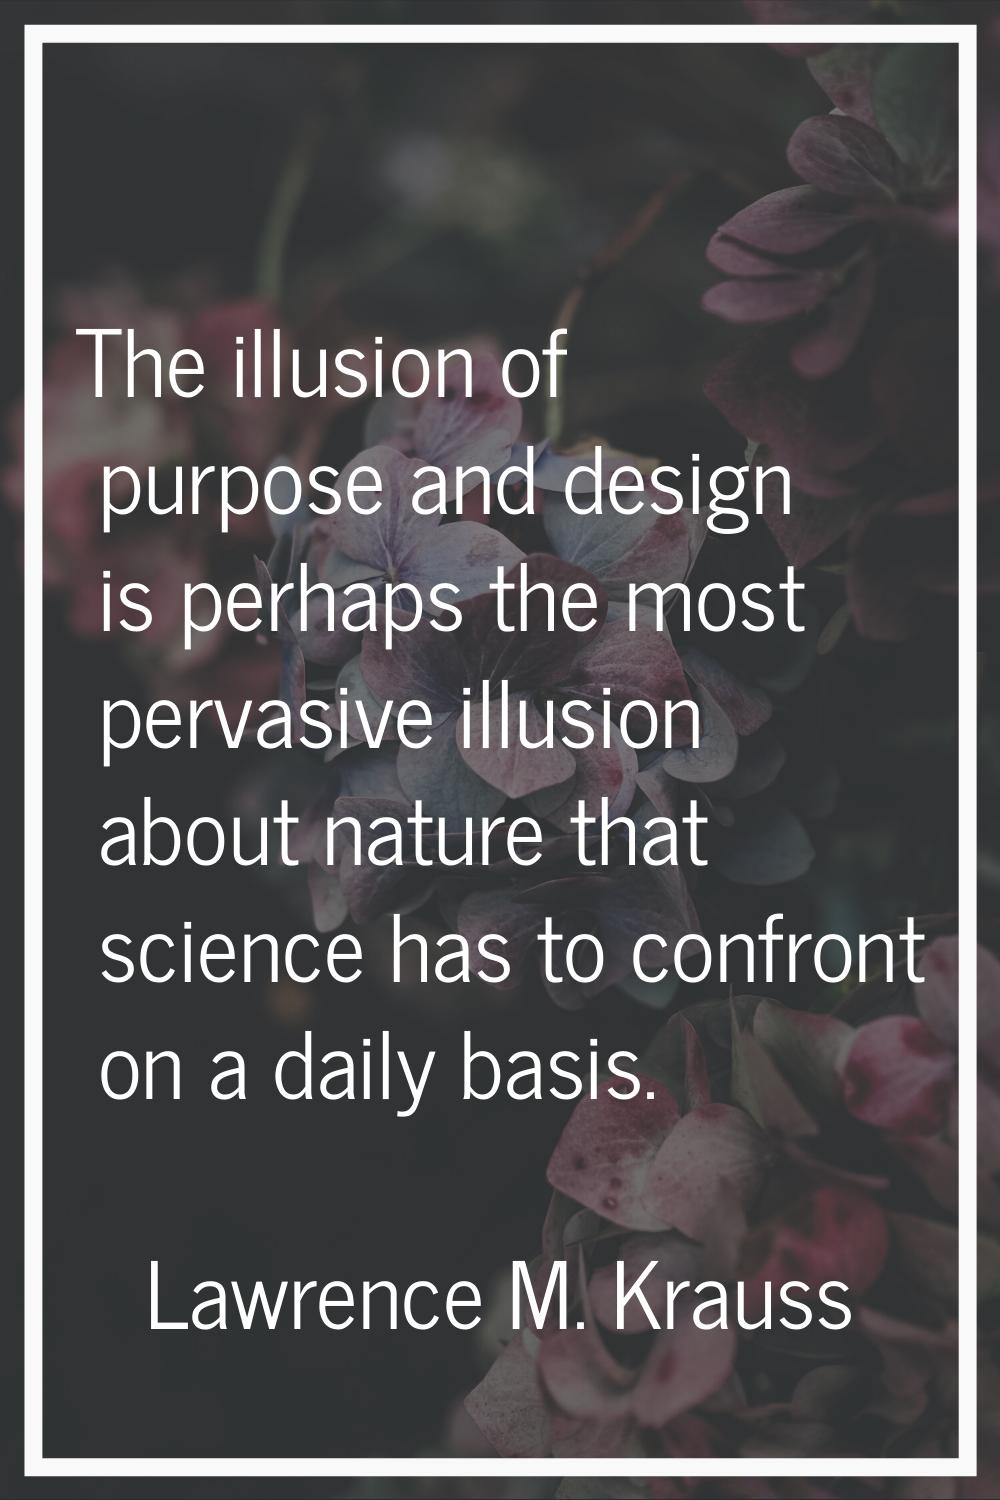 The illusion of purpose and design is perhaps the most pervasive illusion about nature that science